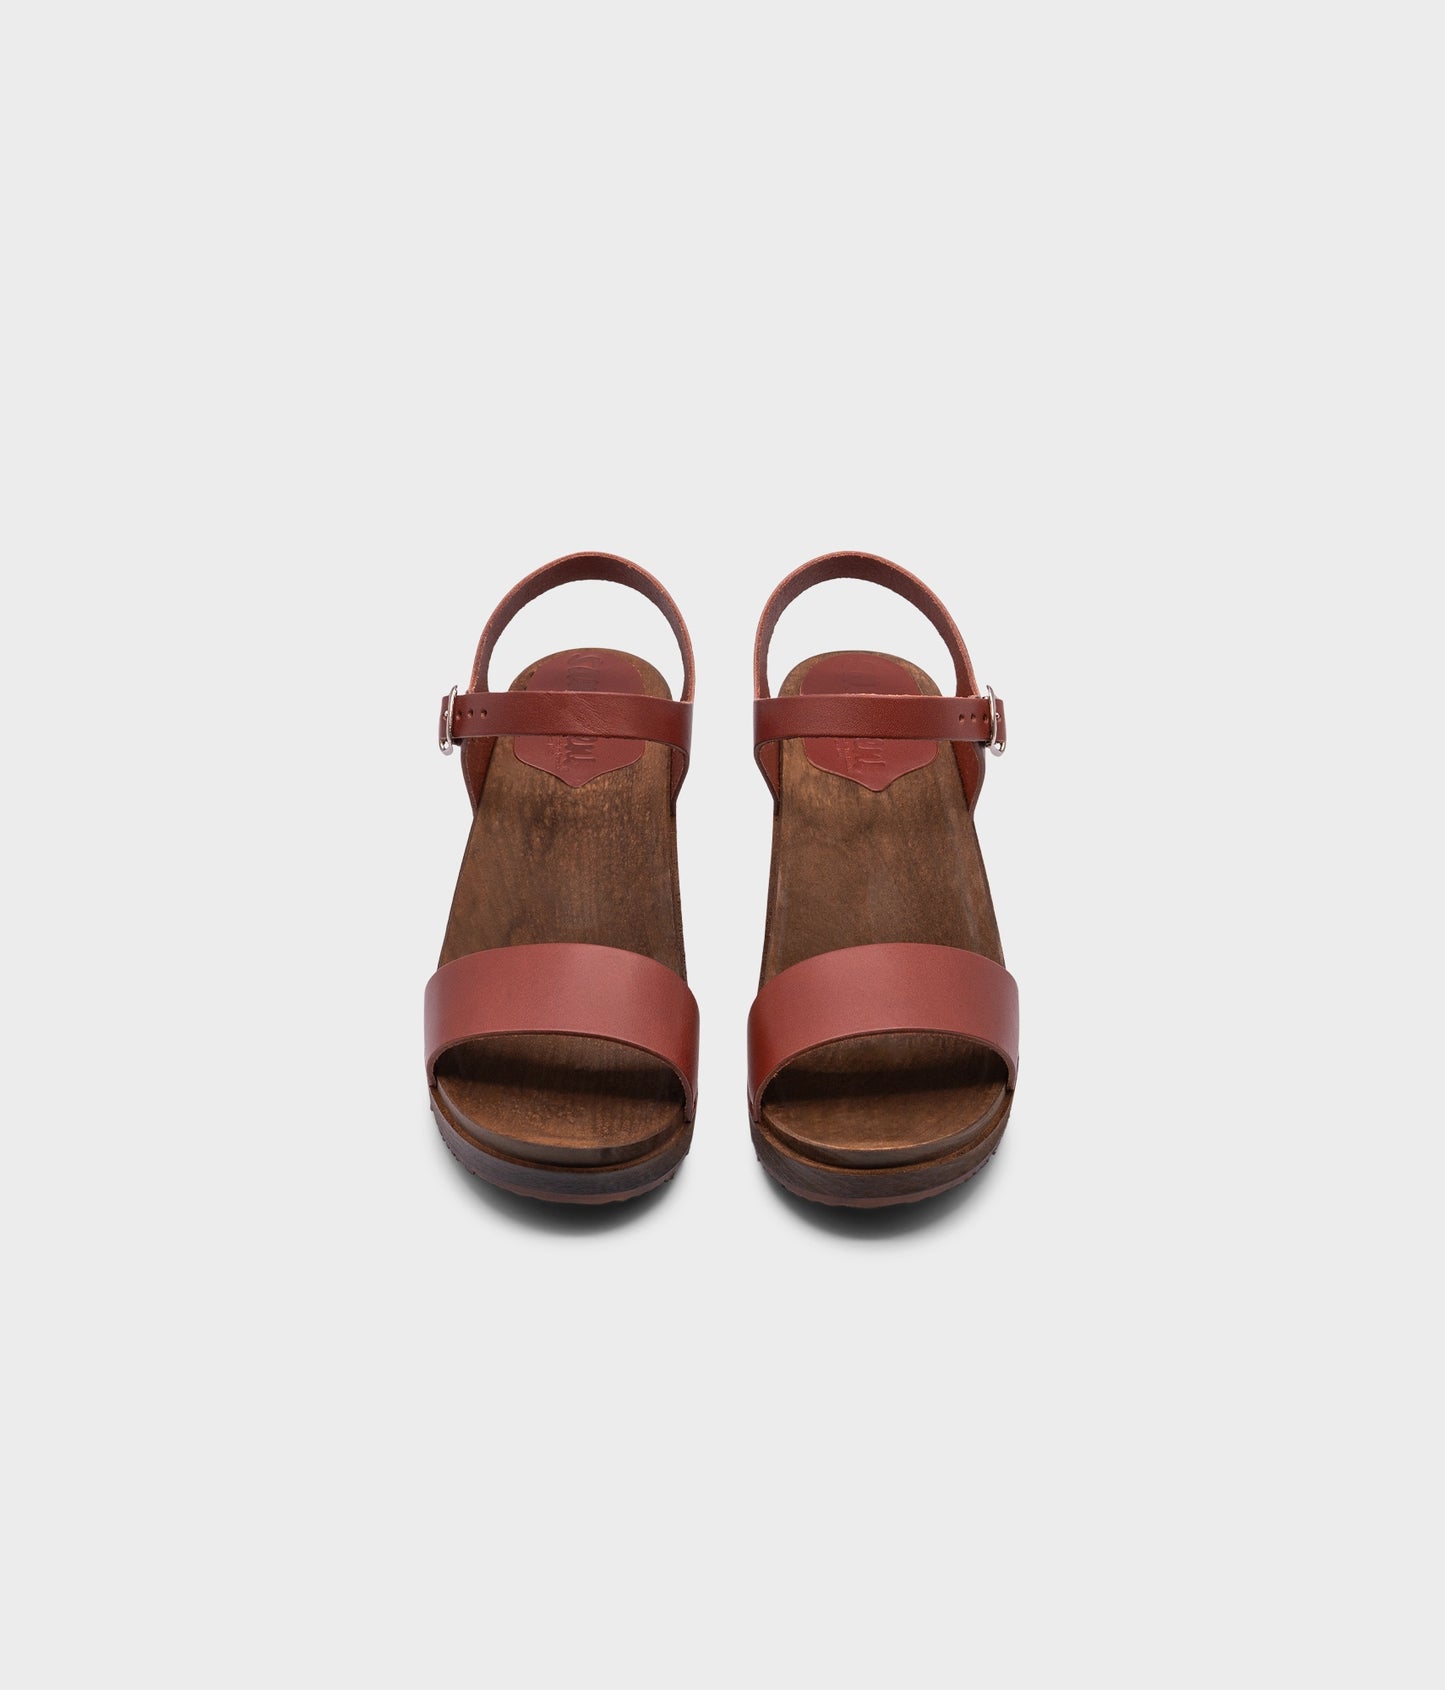 low heeled open-toe clog sandal in cognac red vegetable tanned leather stapled on a dark wooden base